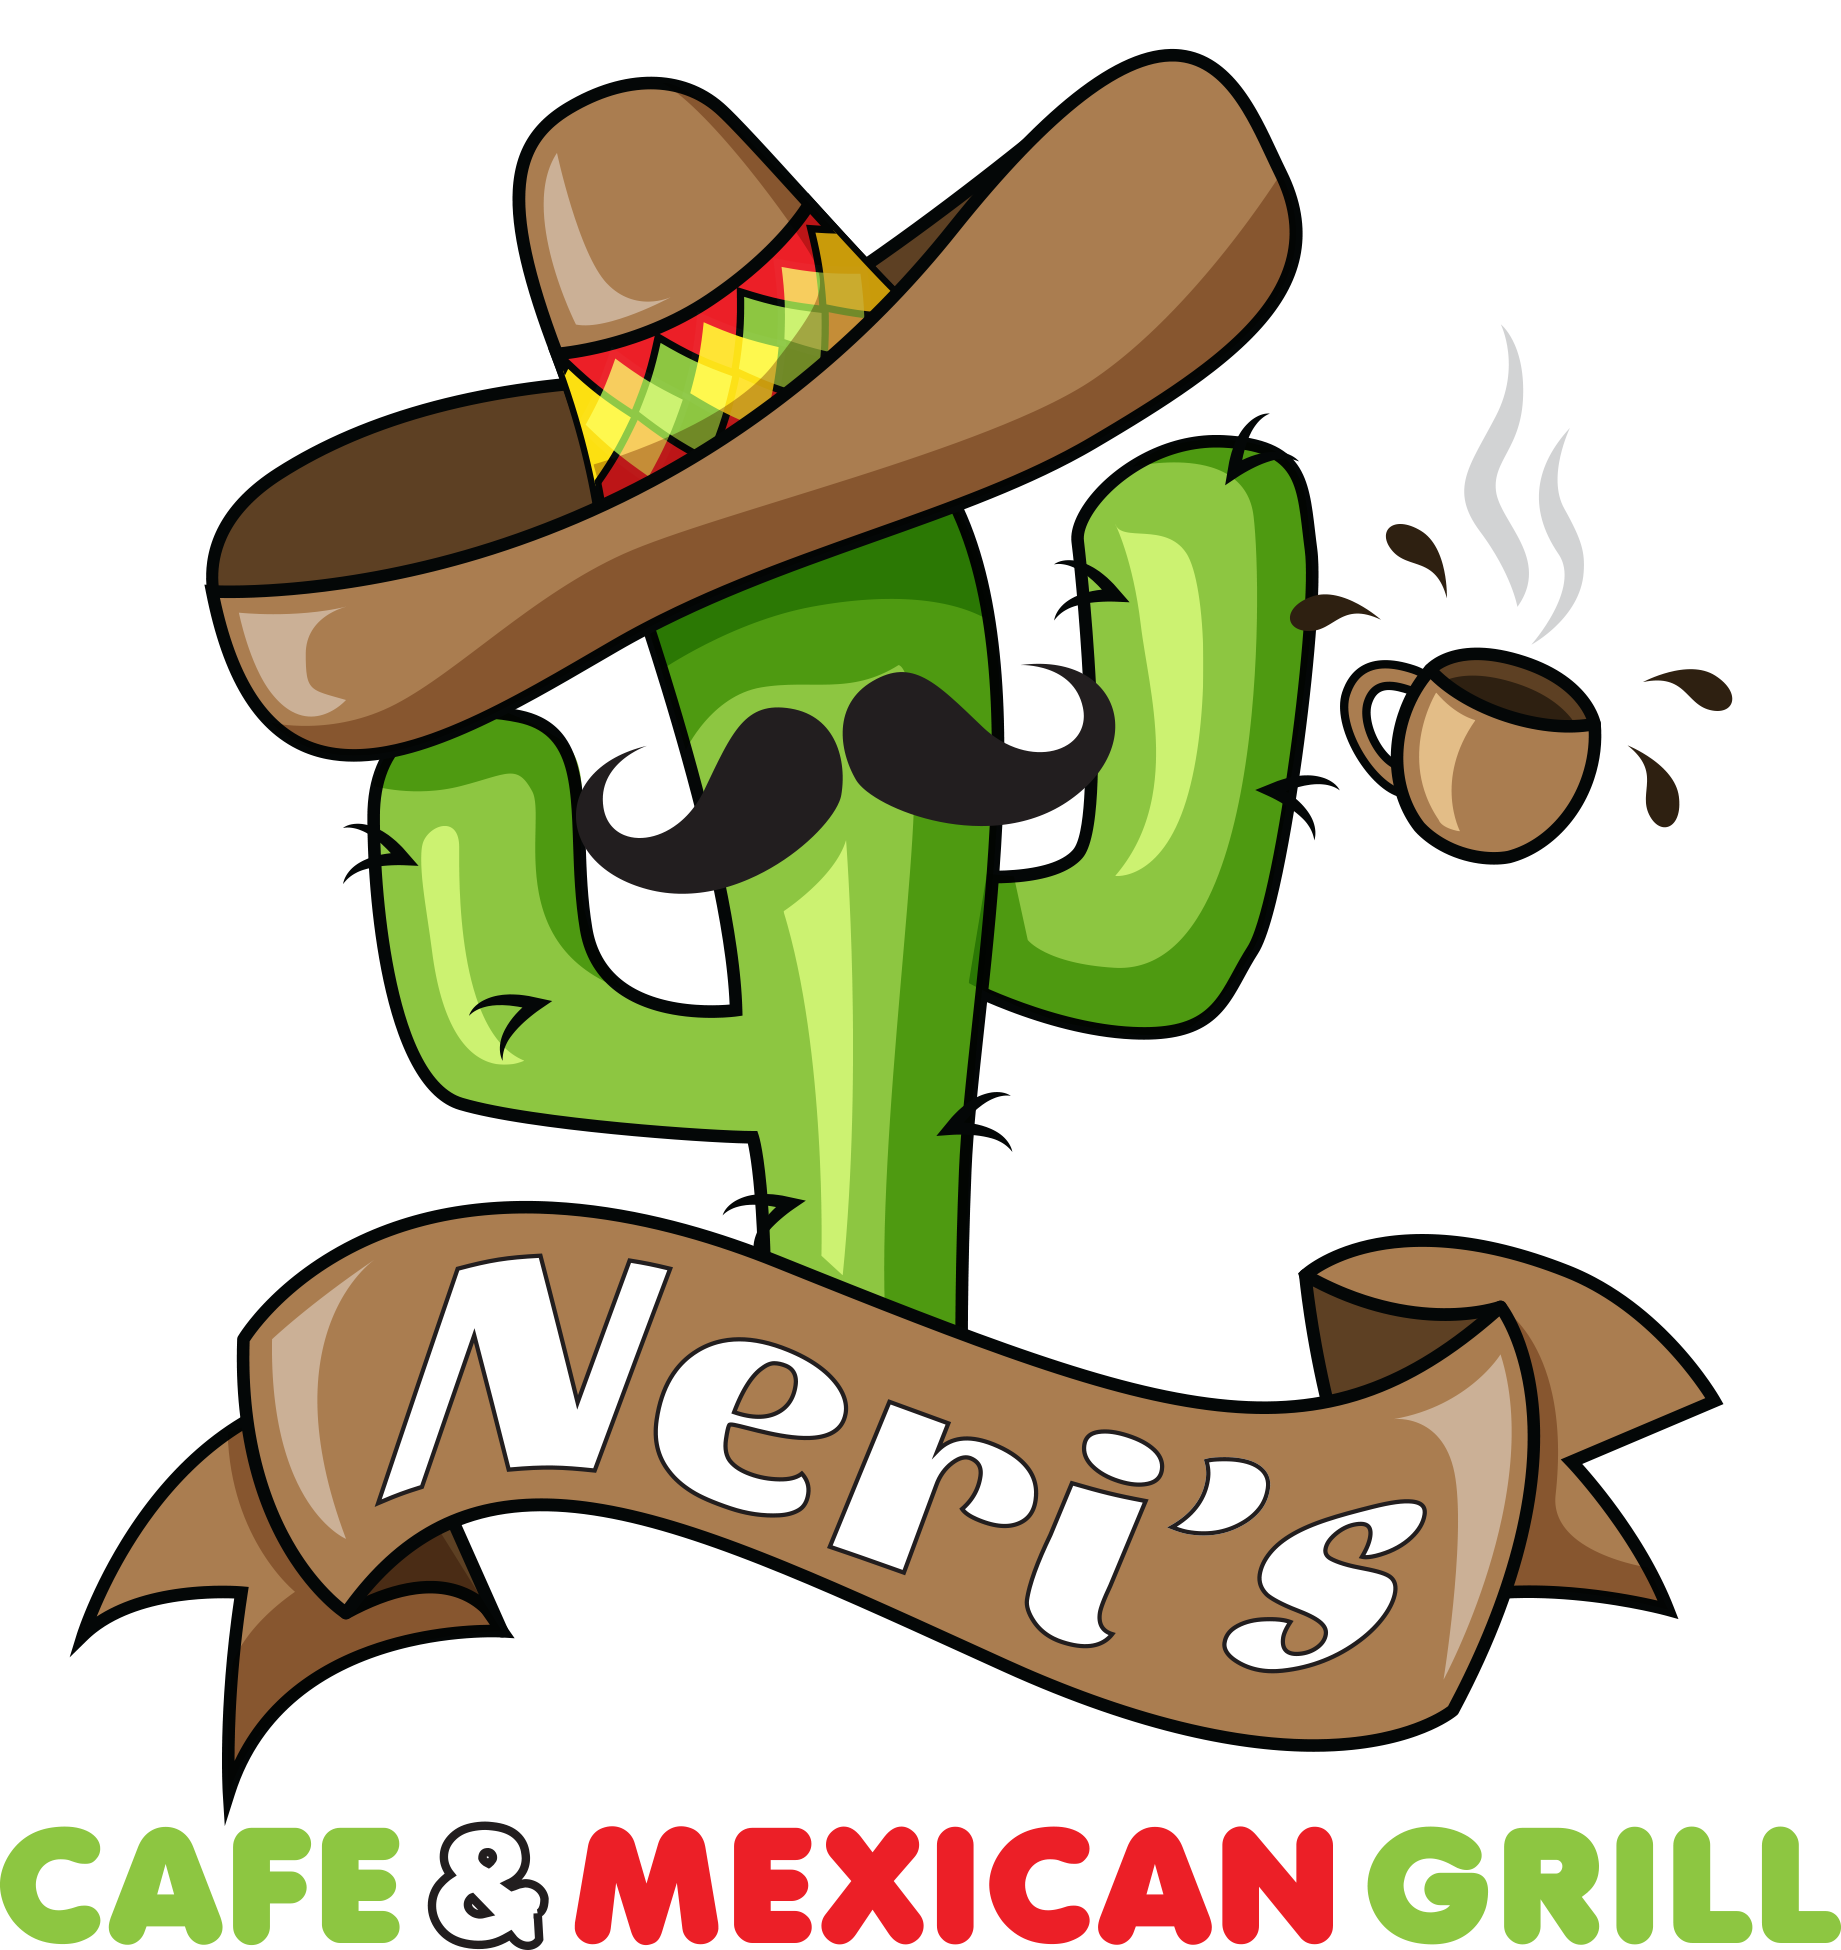 Neri's Cafe & Mexican Grill